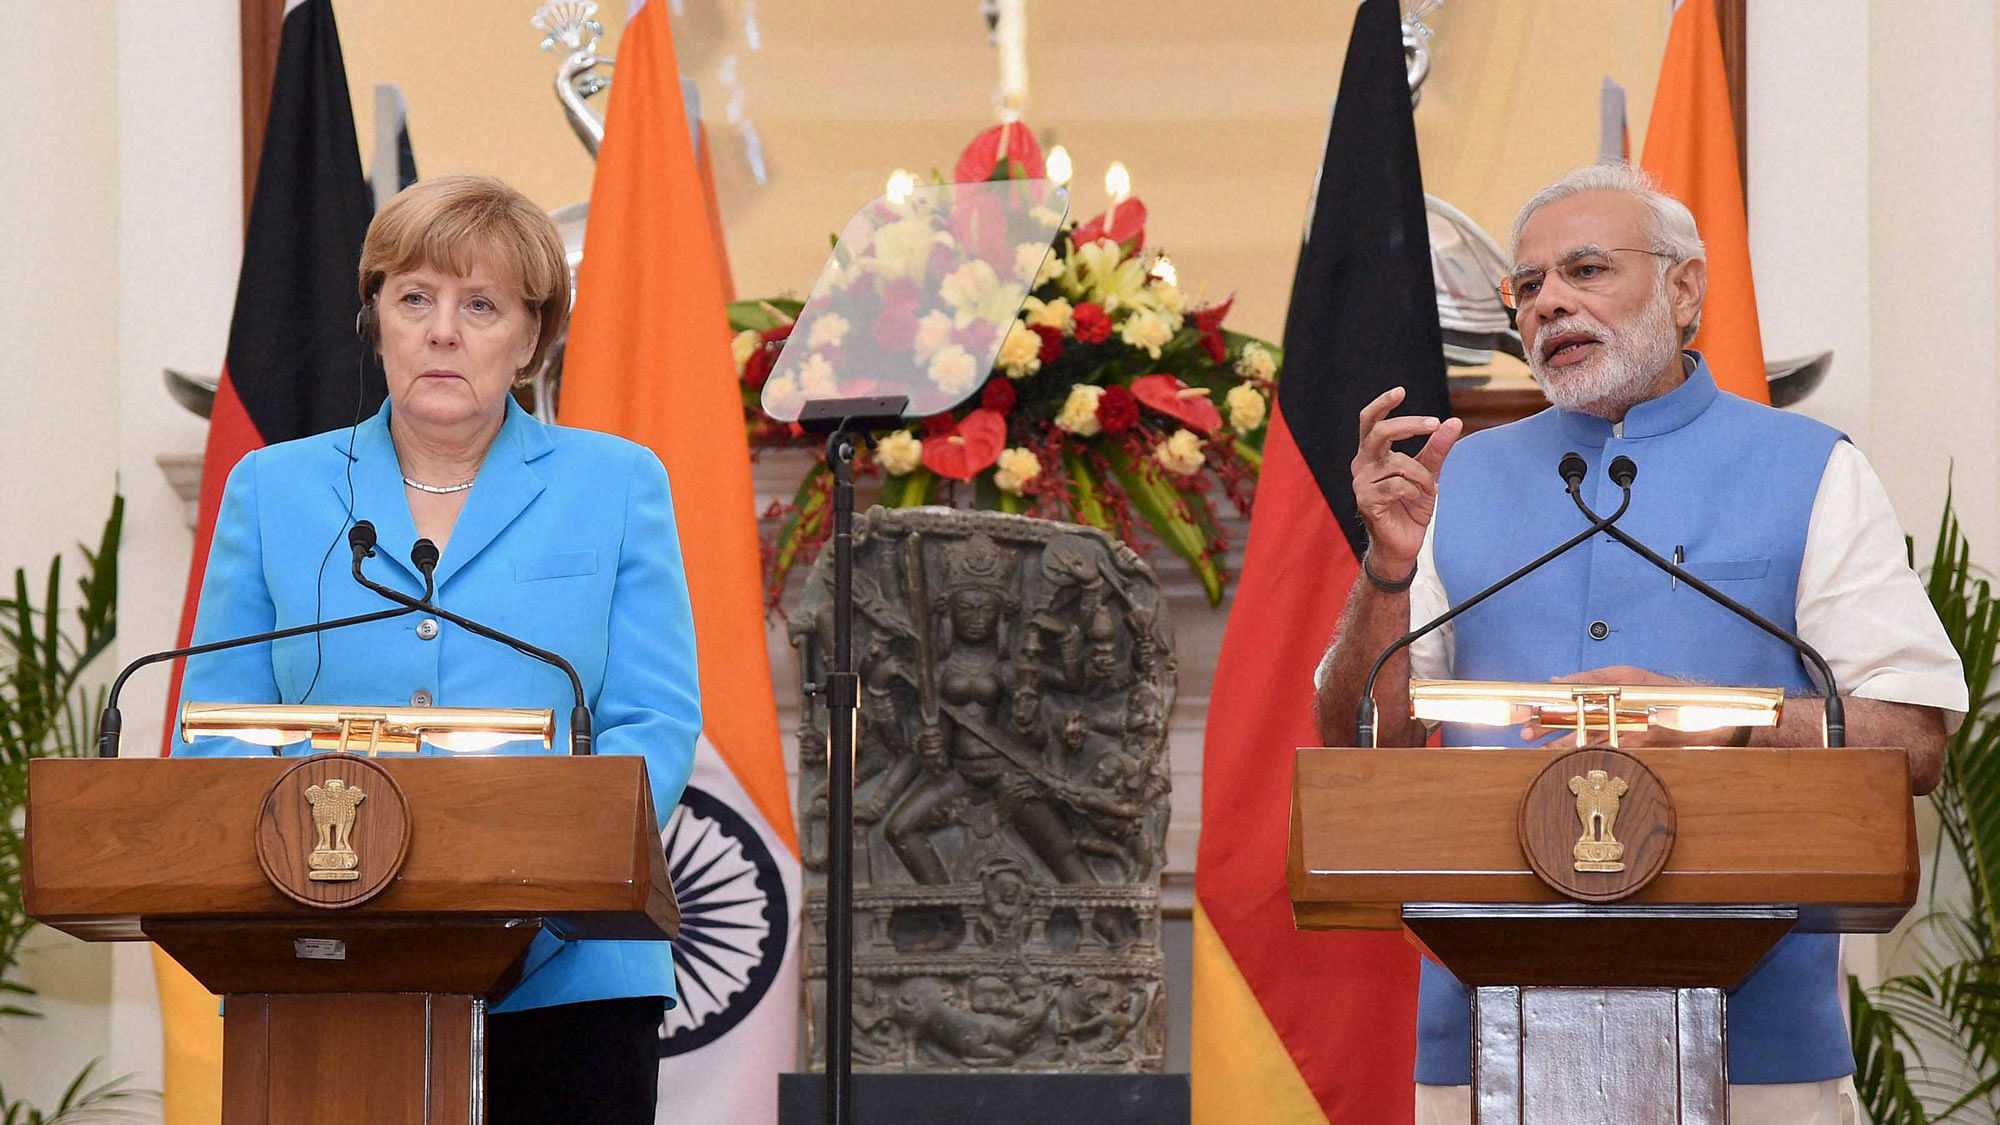 Prime Minister Narendra Modi (L) and German Chancellor Angela Merkel (R) at a joint press conference following a meeting at Hyderabad house in New Delhi on Monday. (Photo: PTI)